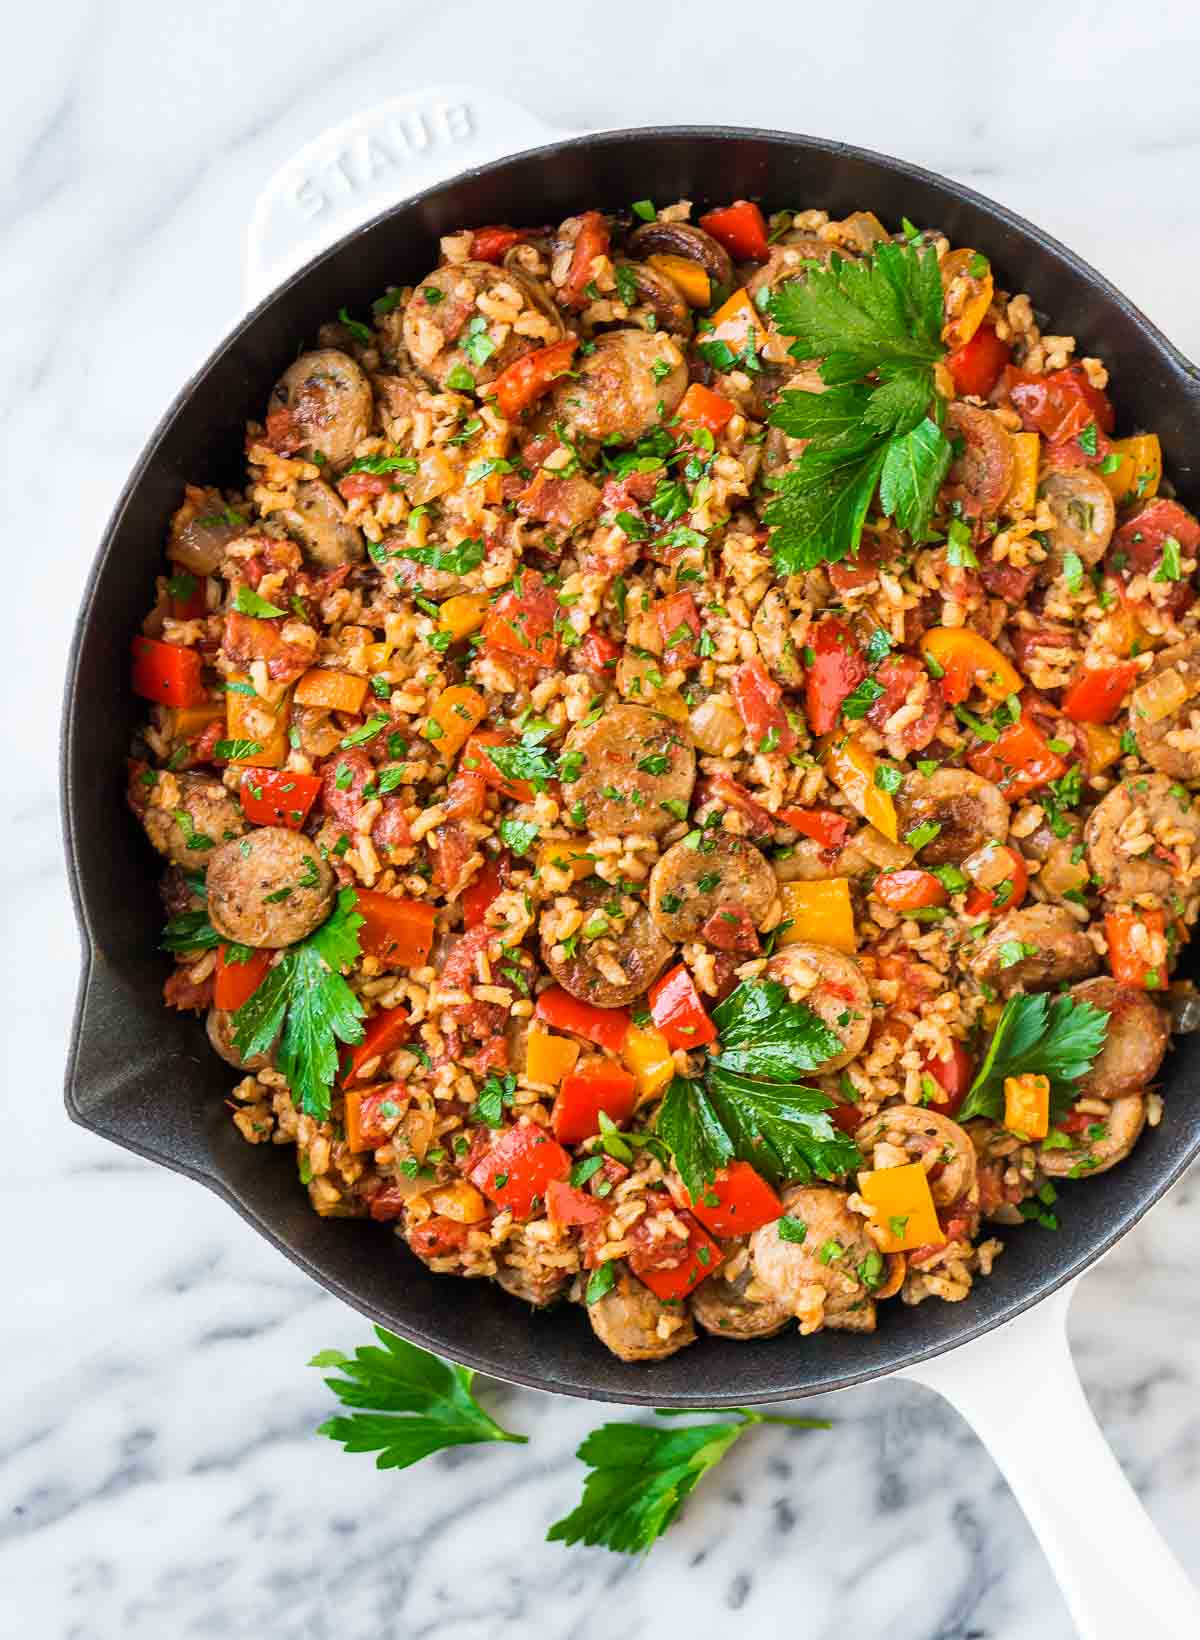 Recipes With Italian Sausage And Rice
 Italian Sausage and Rice Casserole